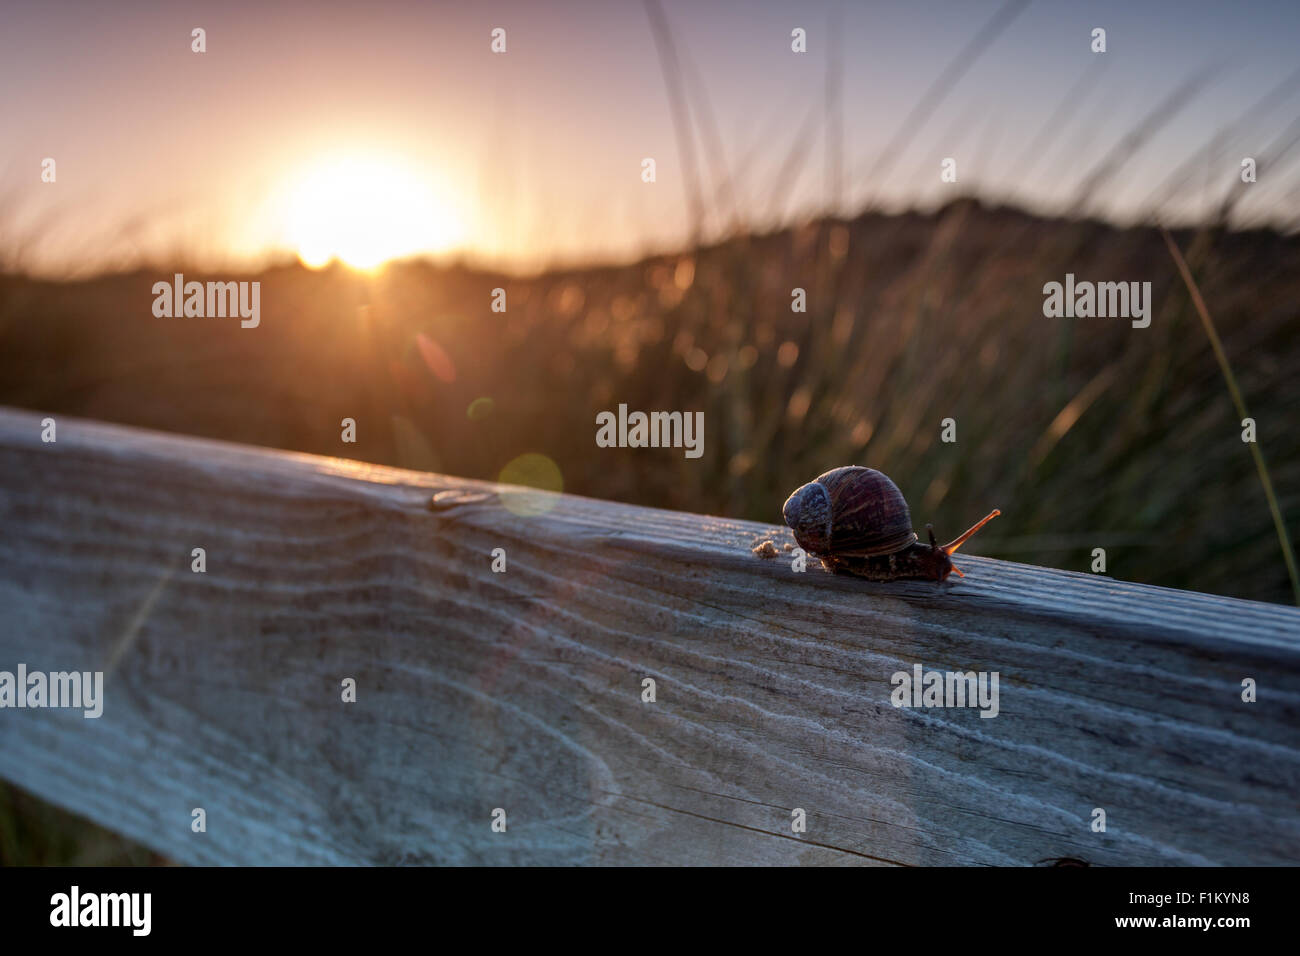 Snail crossing fence in foreground of a sunset amongst the dunes Stock Photo